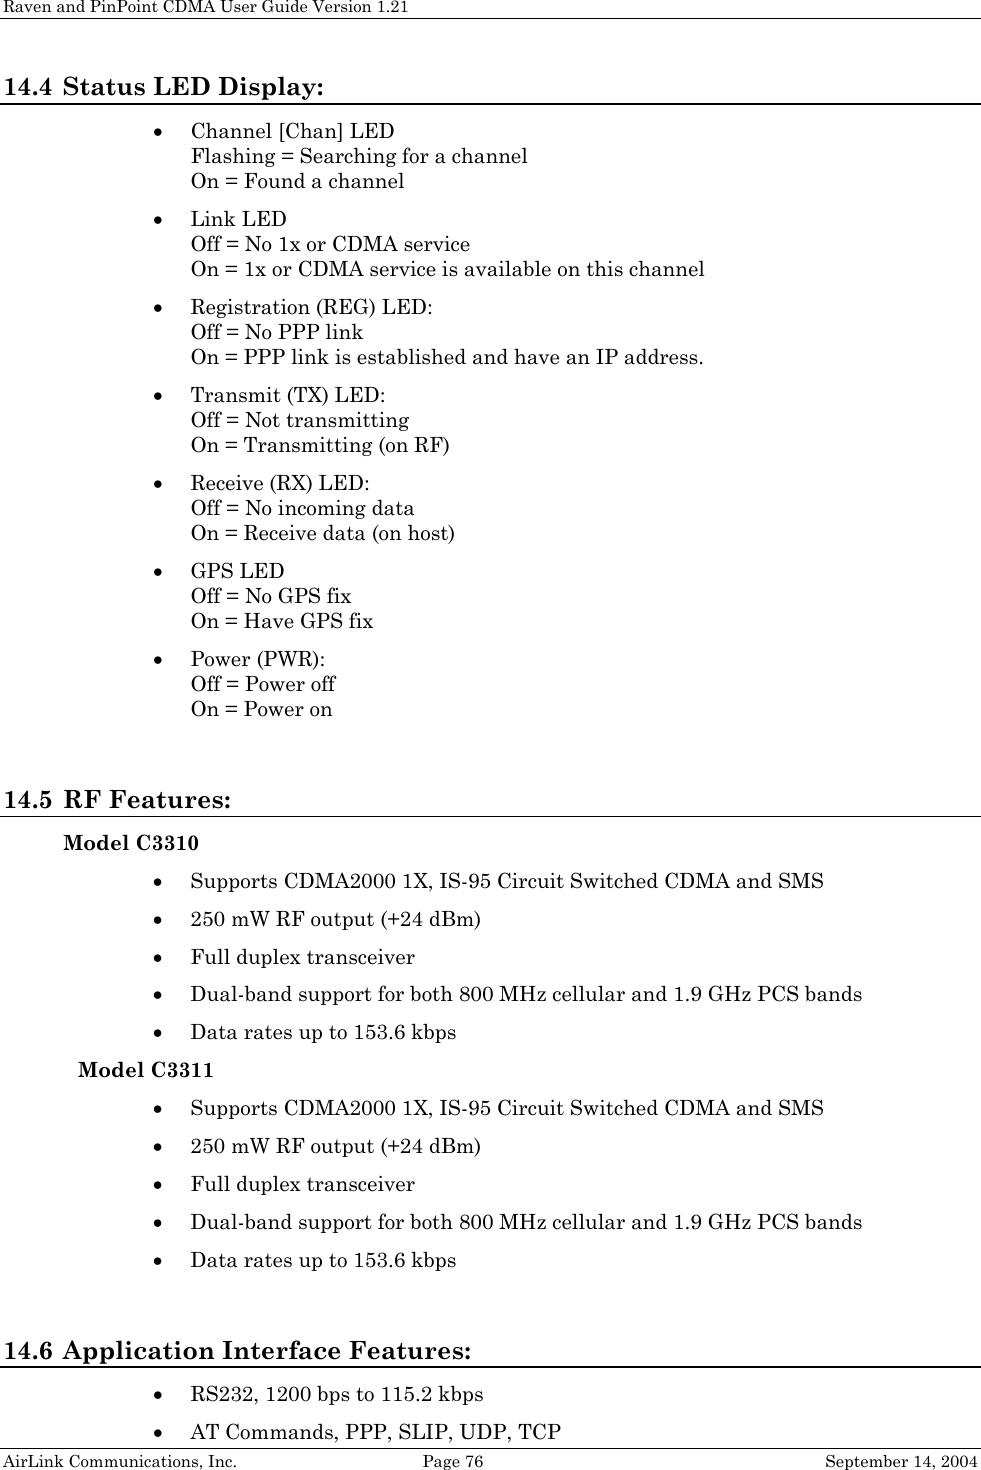 Raven and PinPoint CDMA User Guide Version 1.21 AirLink Communications, Inc.  Page 76  September 14, 2004 14.4 Status LED Display: • Channel [Chan] LED Flashing = Searching for a channel On = Found a channel • Link LED Off = No 1x or CDMA service On = 1x or CDMA service is available on this channel • Registration (REG) LED: Off = No PPP link  On = PPP link is established and have an IP address. • Transmit (TX) LED: Off = Not transmitting On = Transmitting (on RF) • Receive (RX) LED: Off = No incoming data On = Receive data (on host) • GPS LED Off = No GPS fix On = Have GPS fix • Power (PWR): Off = Power off On = Power on  14.5 RF Features: Model C3310 • Supports CDMA2000 1X, IS-95 Circuit Switched CDMA and SMS • 250 mW RF output (+24 dBm) • Full duplex transceiver • Dual-band support for both 800 MHz cellular and 1.9 GHz PCS bands • Data rates up to 153.6 kbps Model C3311 • Supports CDMA2000 1X, IS-95 Circuit Switched CDMA and SMS • 250 mW RF output (+24 dBm) • Full duplex transceiver • Dual-band support for both 800 MHz cellular and 1.9 GHz PCS bands • Data rates up to 153.6 kbps  14.6 Application Interface Features: • RS232, 1200 bps to 115.2 kbps • AT Commands, PPP, SLIP, UDP, TCP 